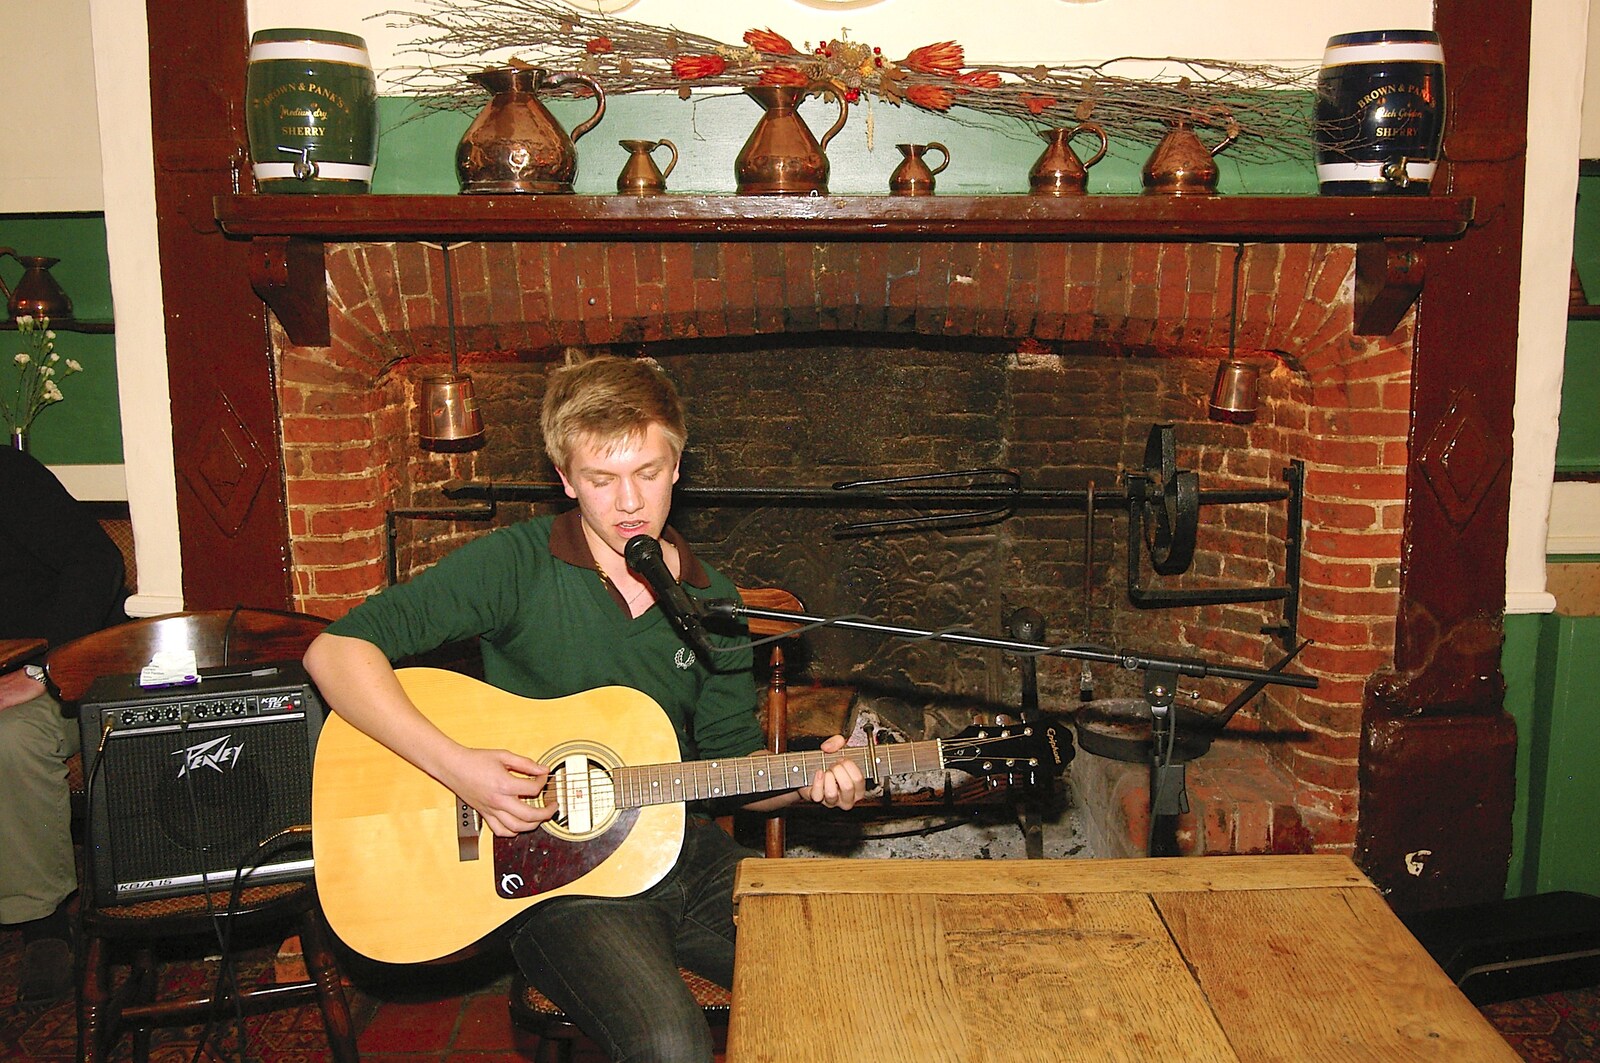 Rory by the fireplace in the Scole Inn from Rory Hill's "Tour in a Night", Norfolk and Suffolk - 17th November 2006